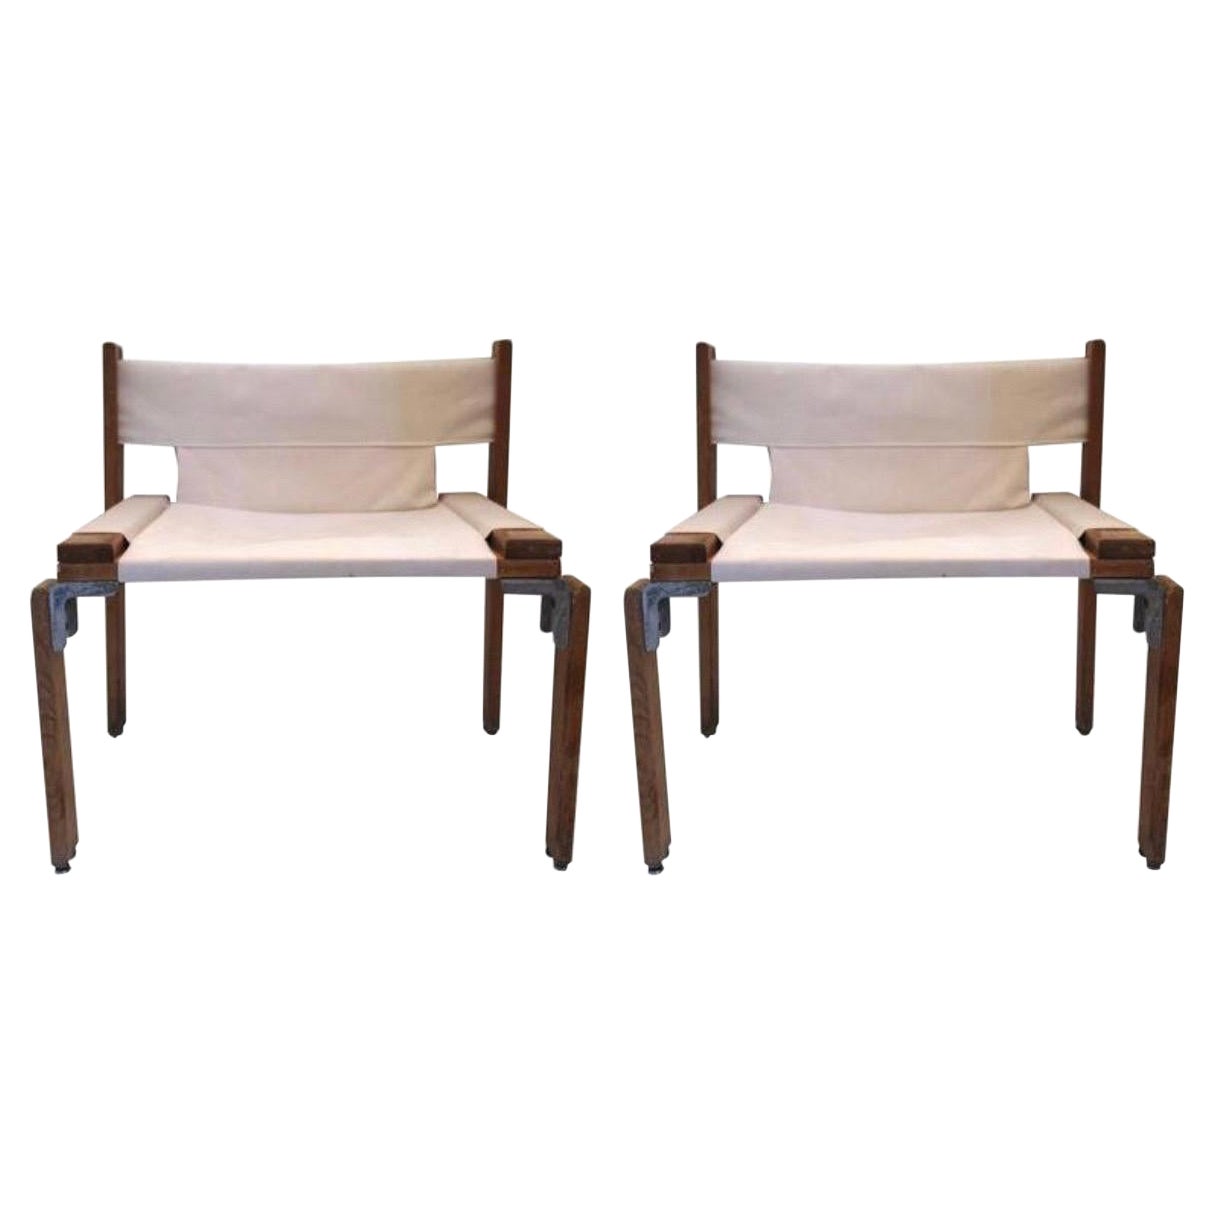 Pair of low chairs by Candilis & Blomstedt for Les Charrats, France 1968 For Sale